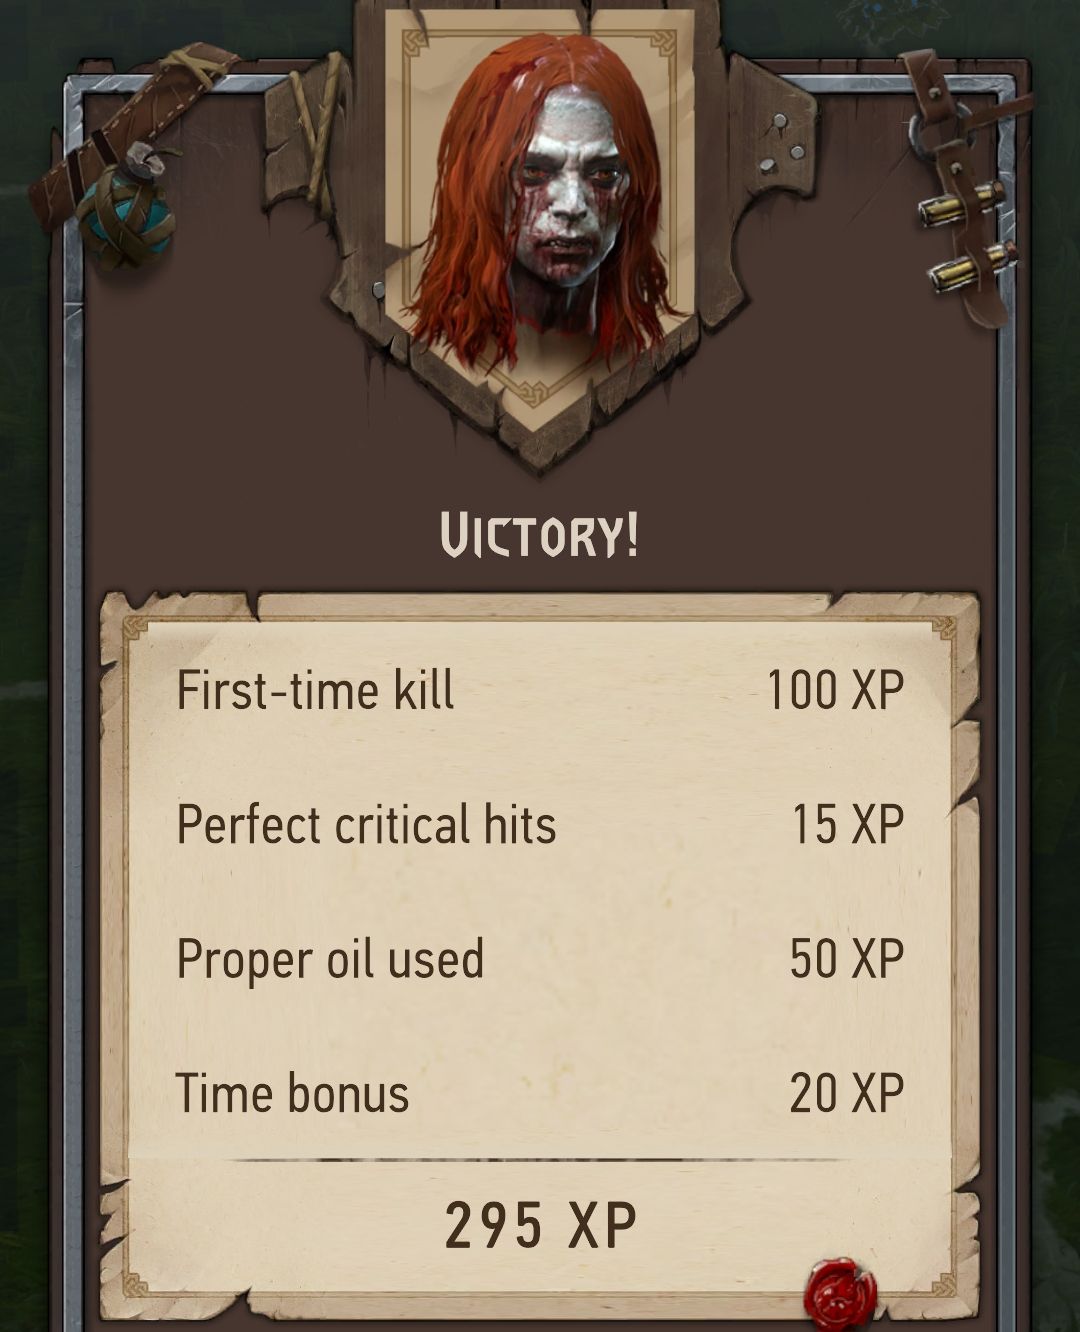 Monster-kill-victory-trophy-rewards-experience-The-Witcher-Monster-Slayer